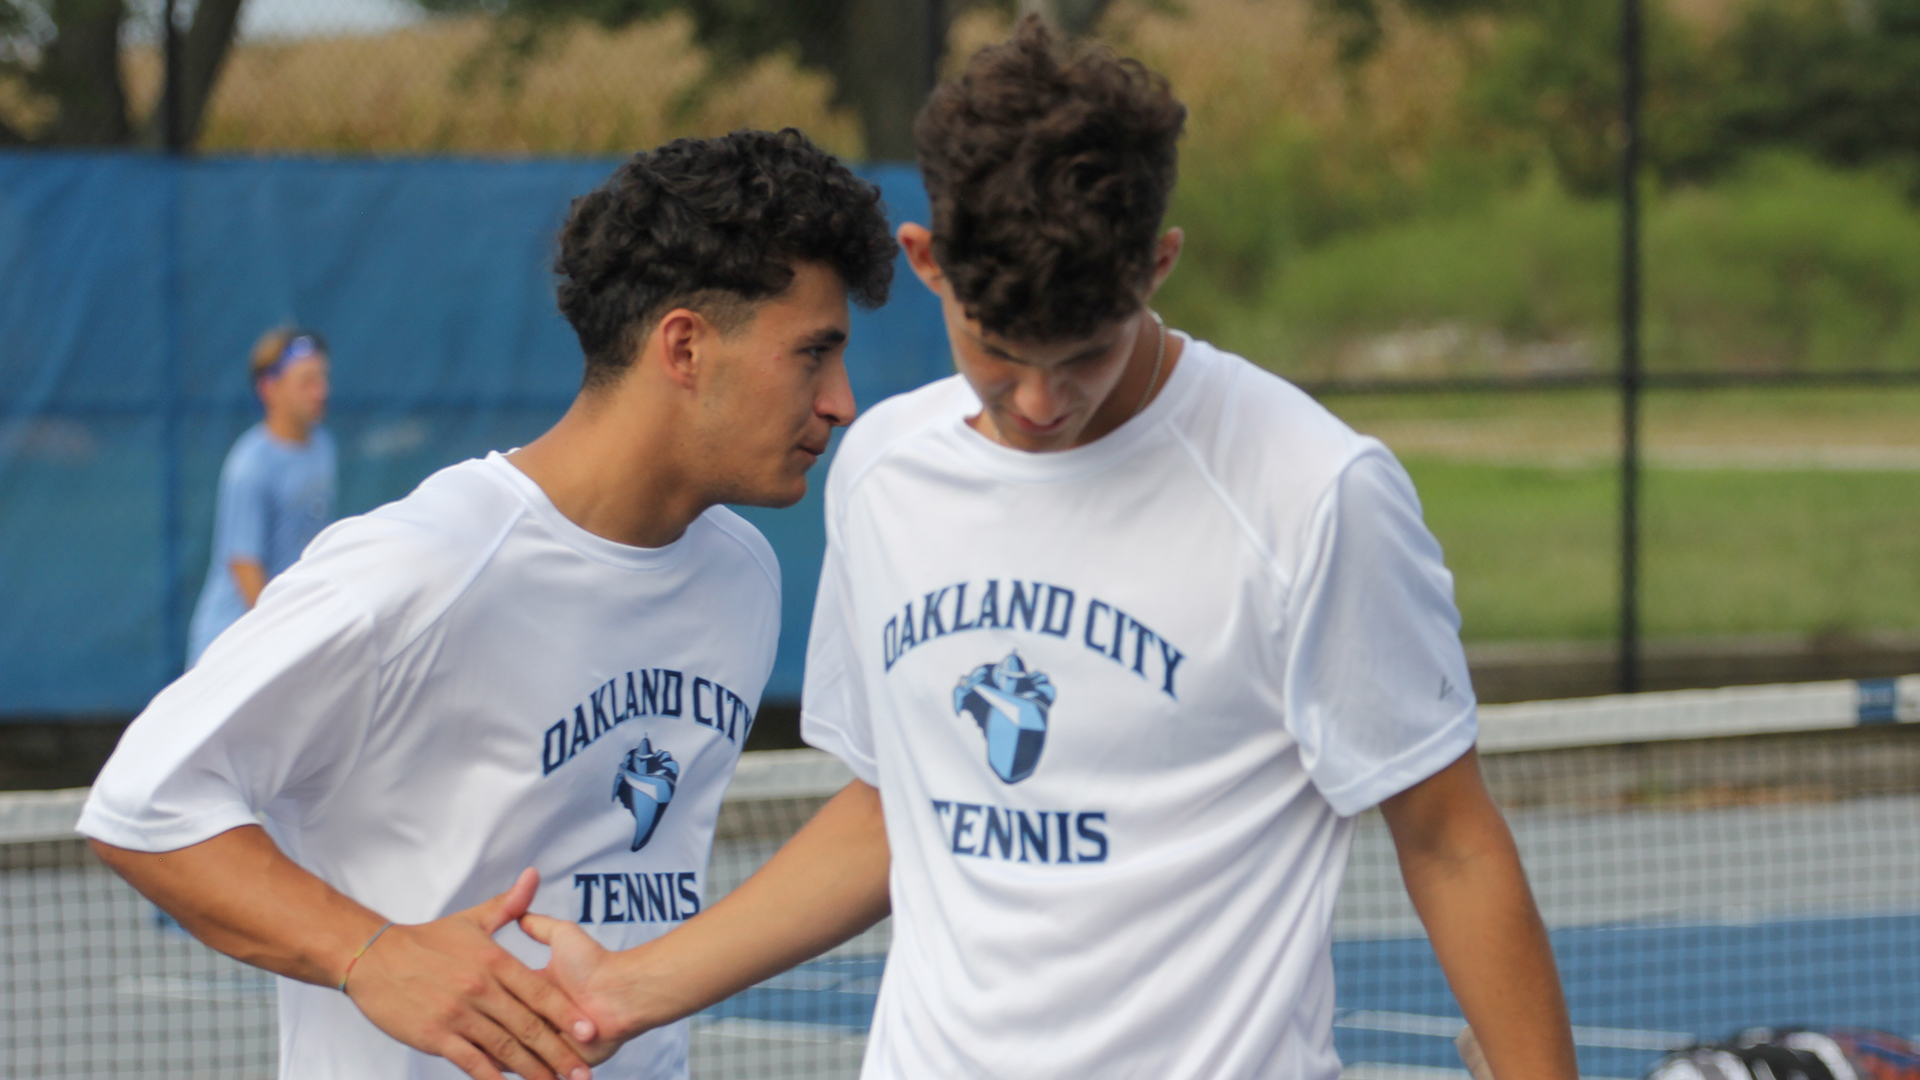 Oakland City ended their season on Tuesday following a 4-1 defeat to Xavier in the first round of the NAIA Men's Tennis National Championship.